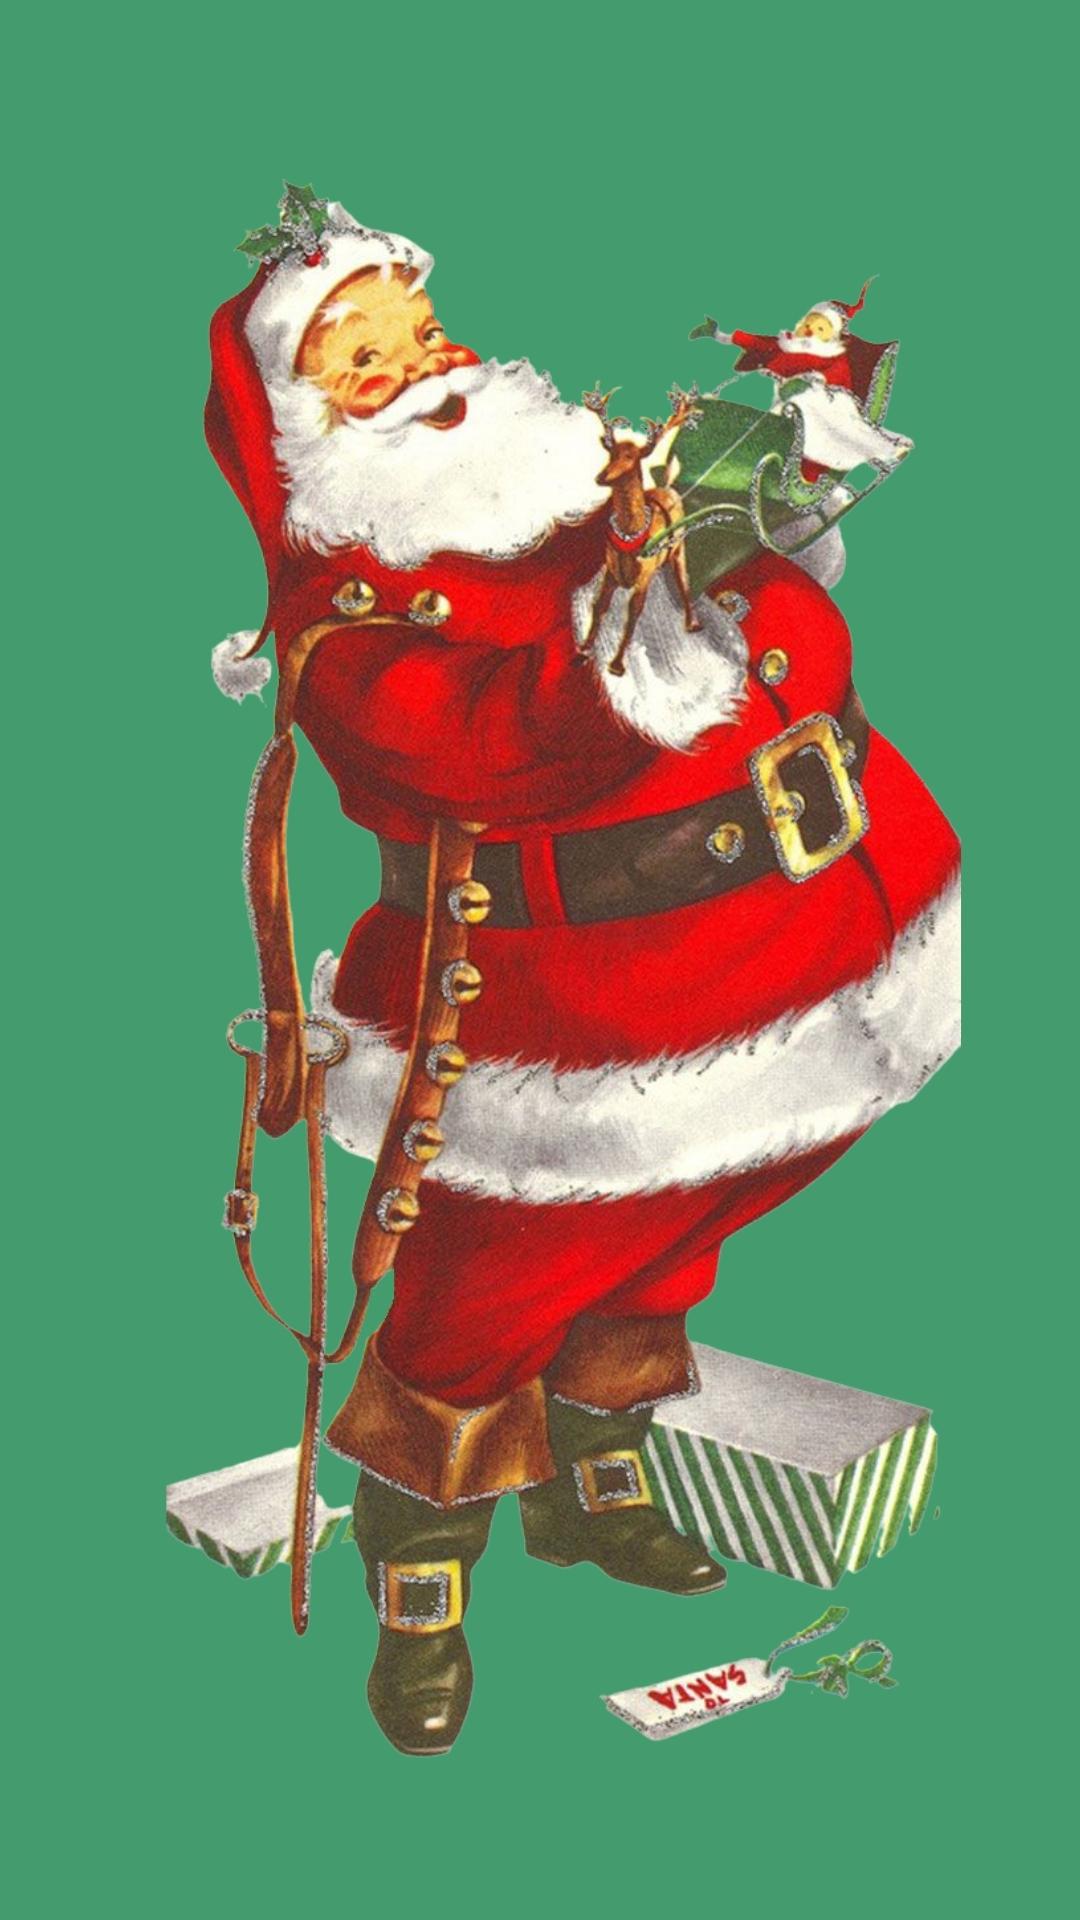 Vintage Santa Claus image used as a Christmas phone wallpaper background.